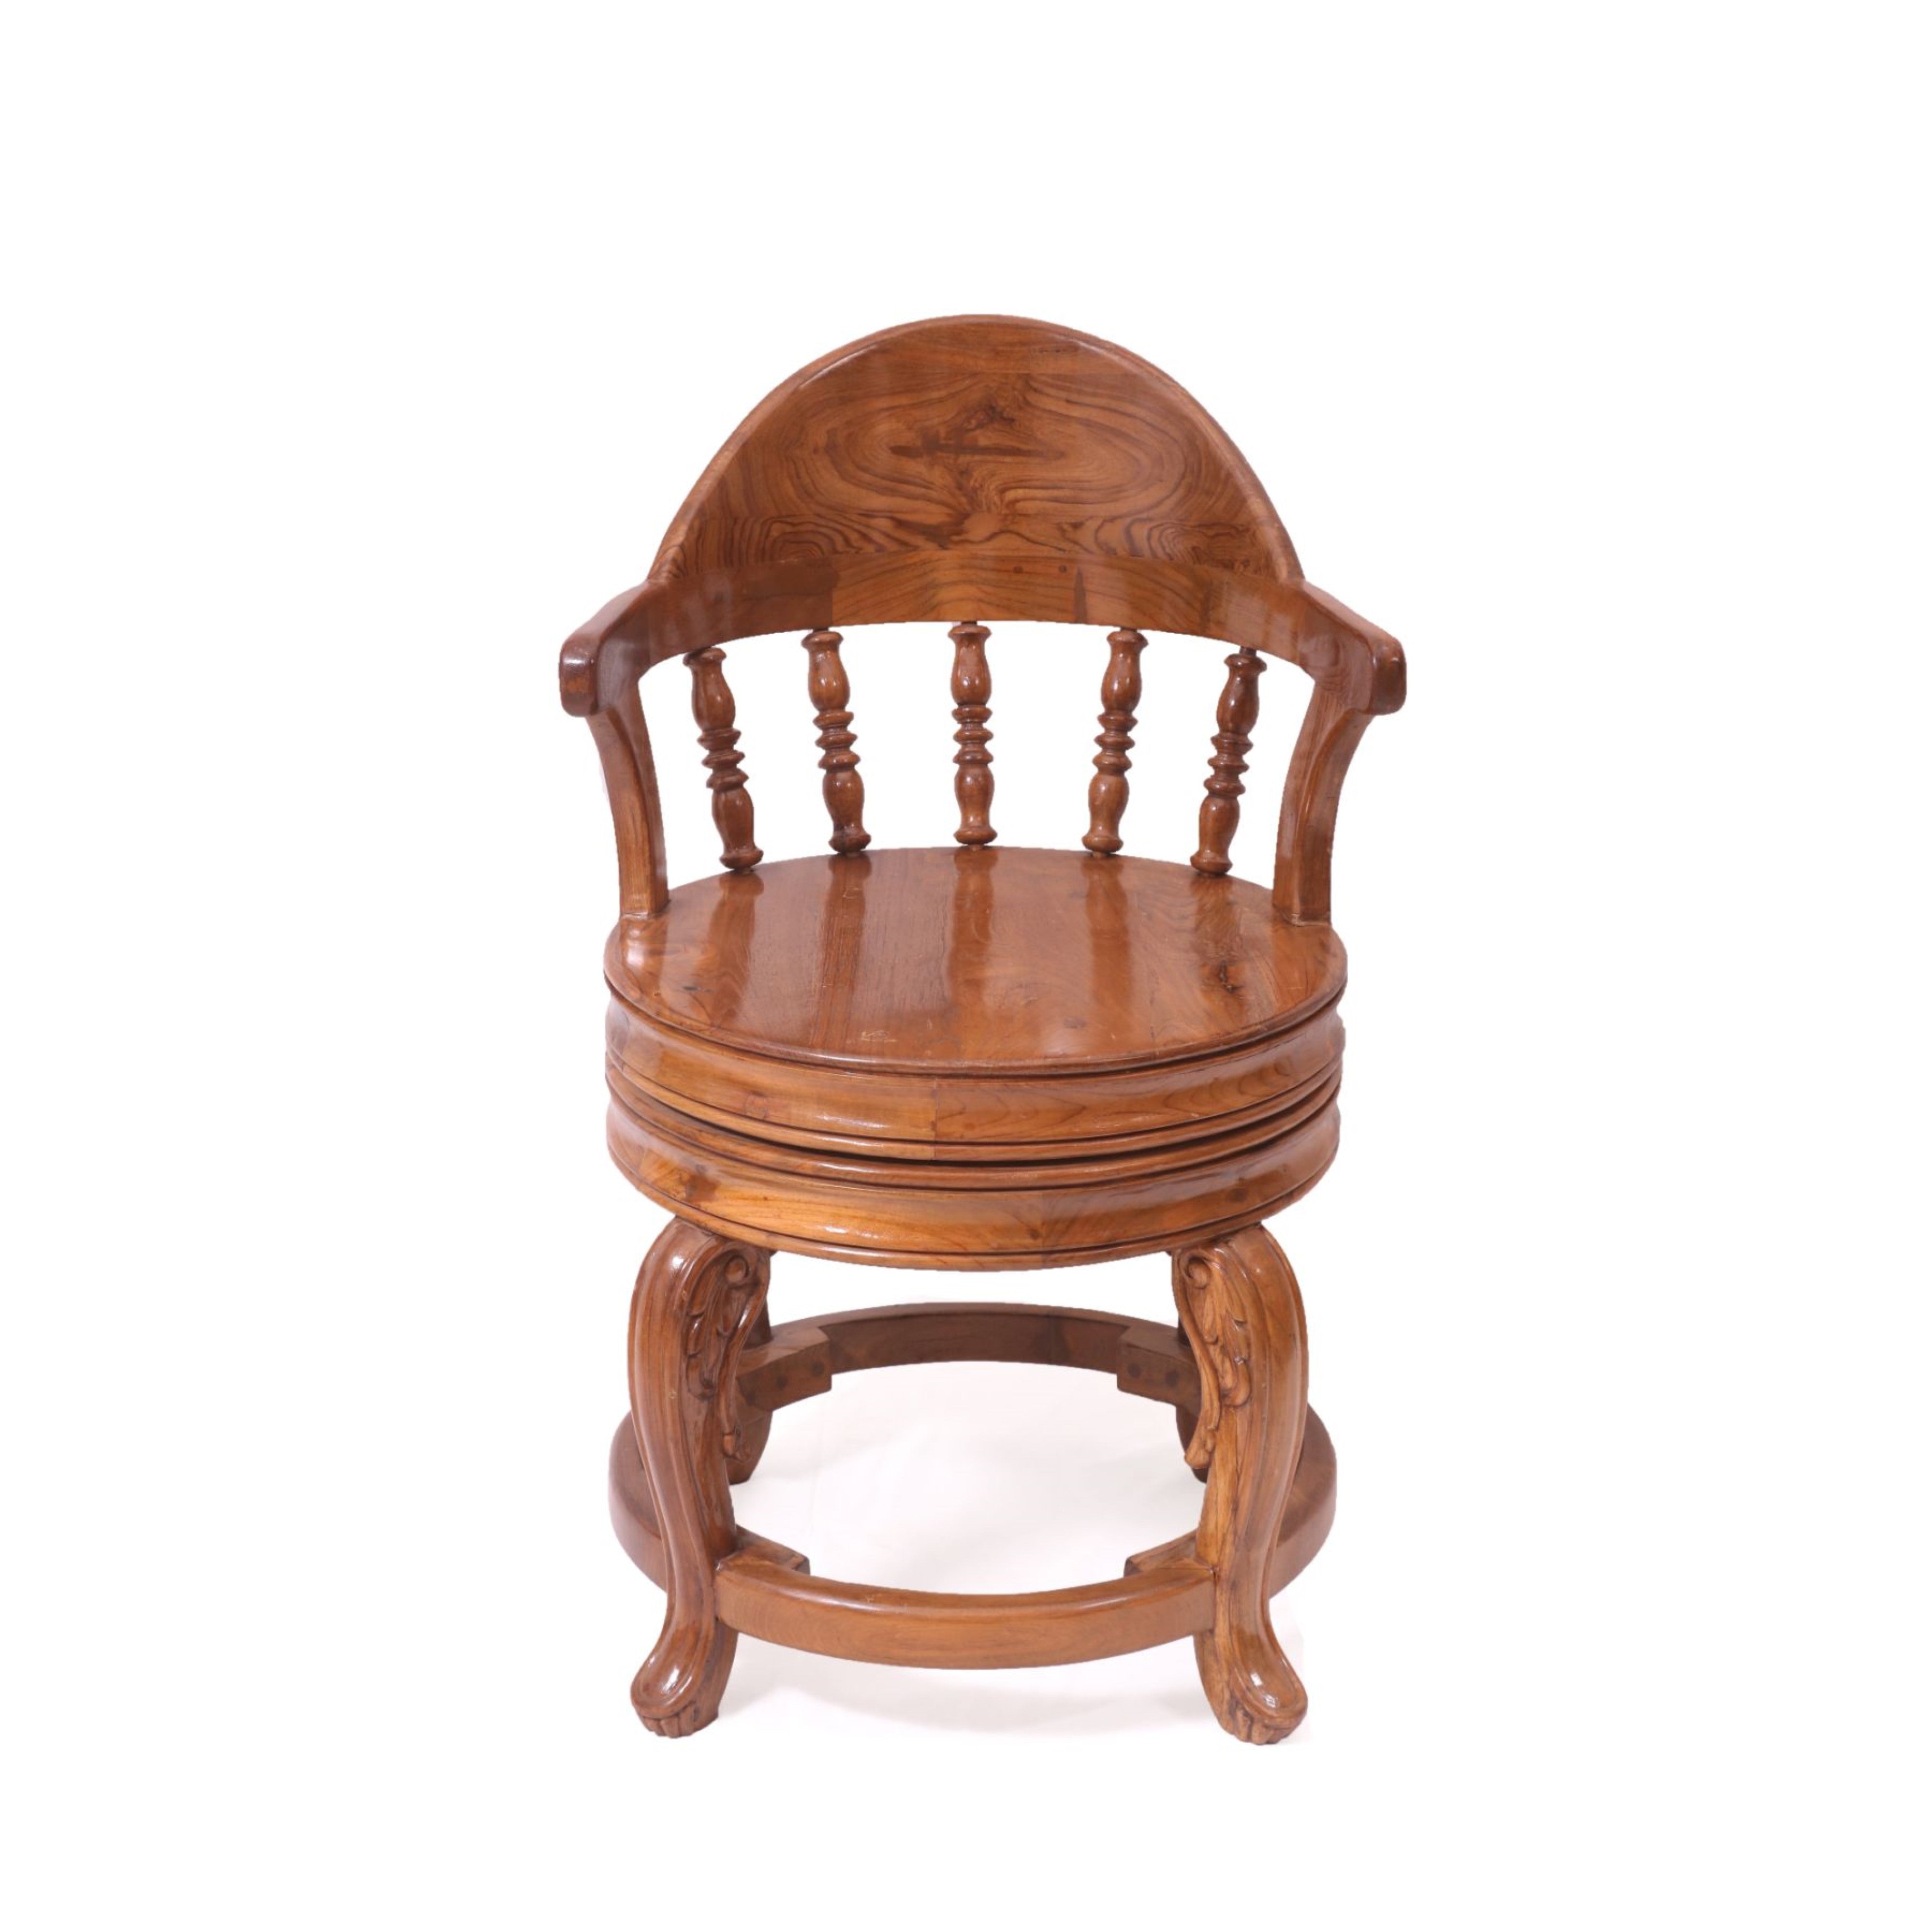 Rounded Carved Wooden Chair Arm Chair